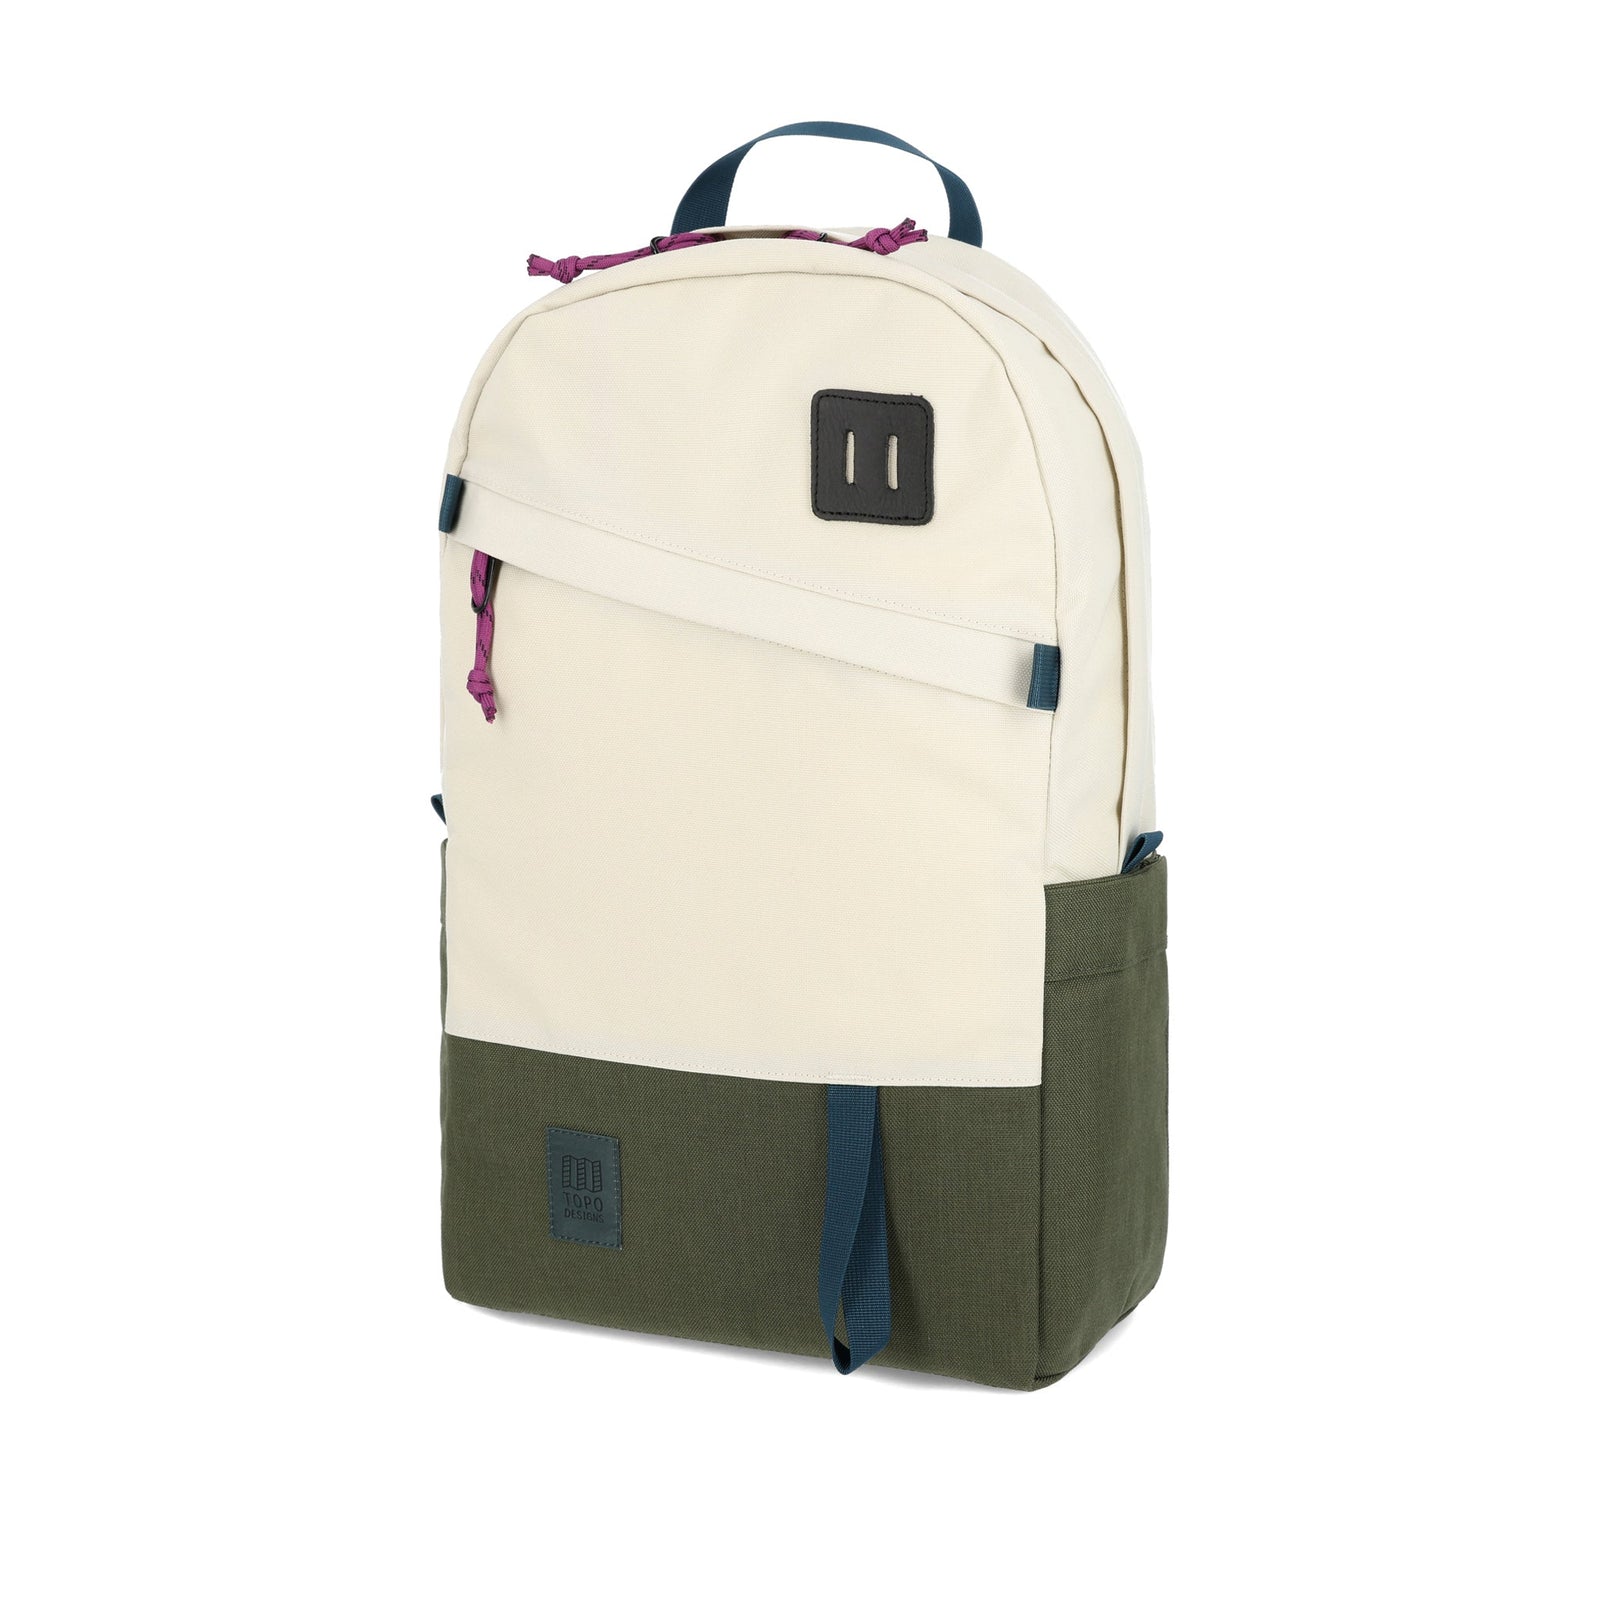 Topo Designs Daypack Classic 100% recycled nylon laptop backpack for work or school in "Bone White / Olive" green